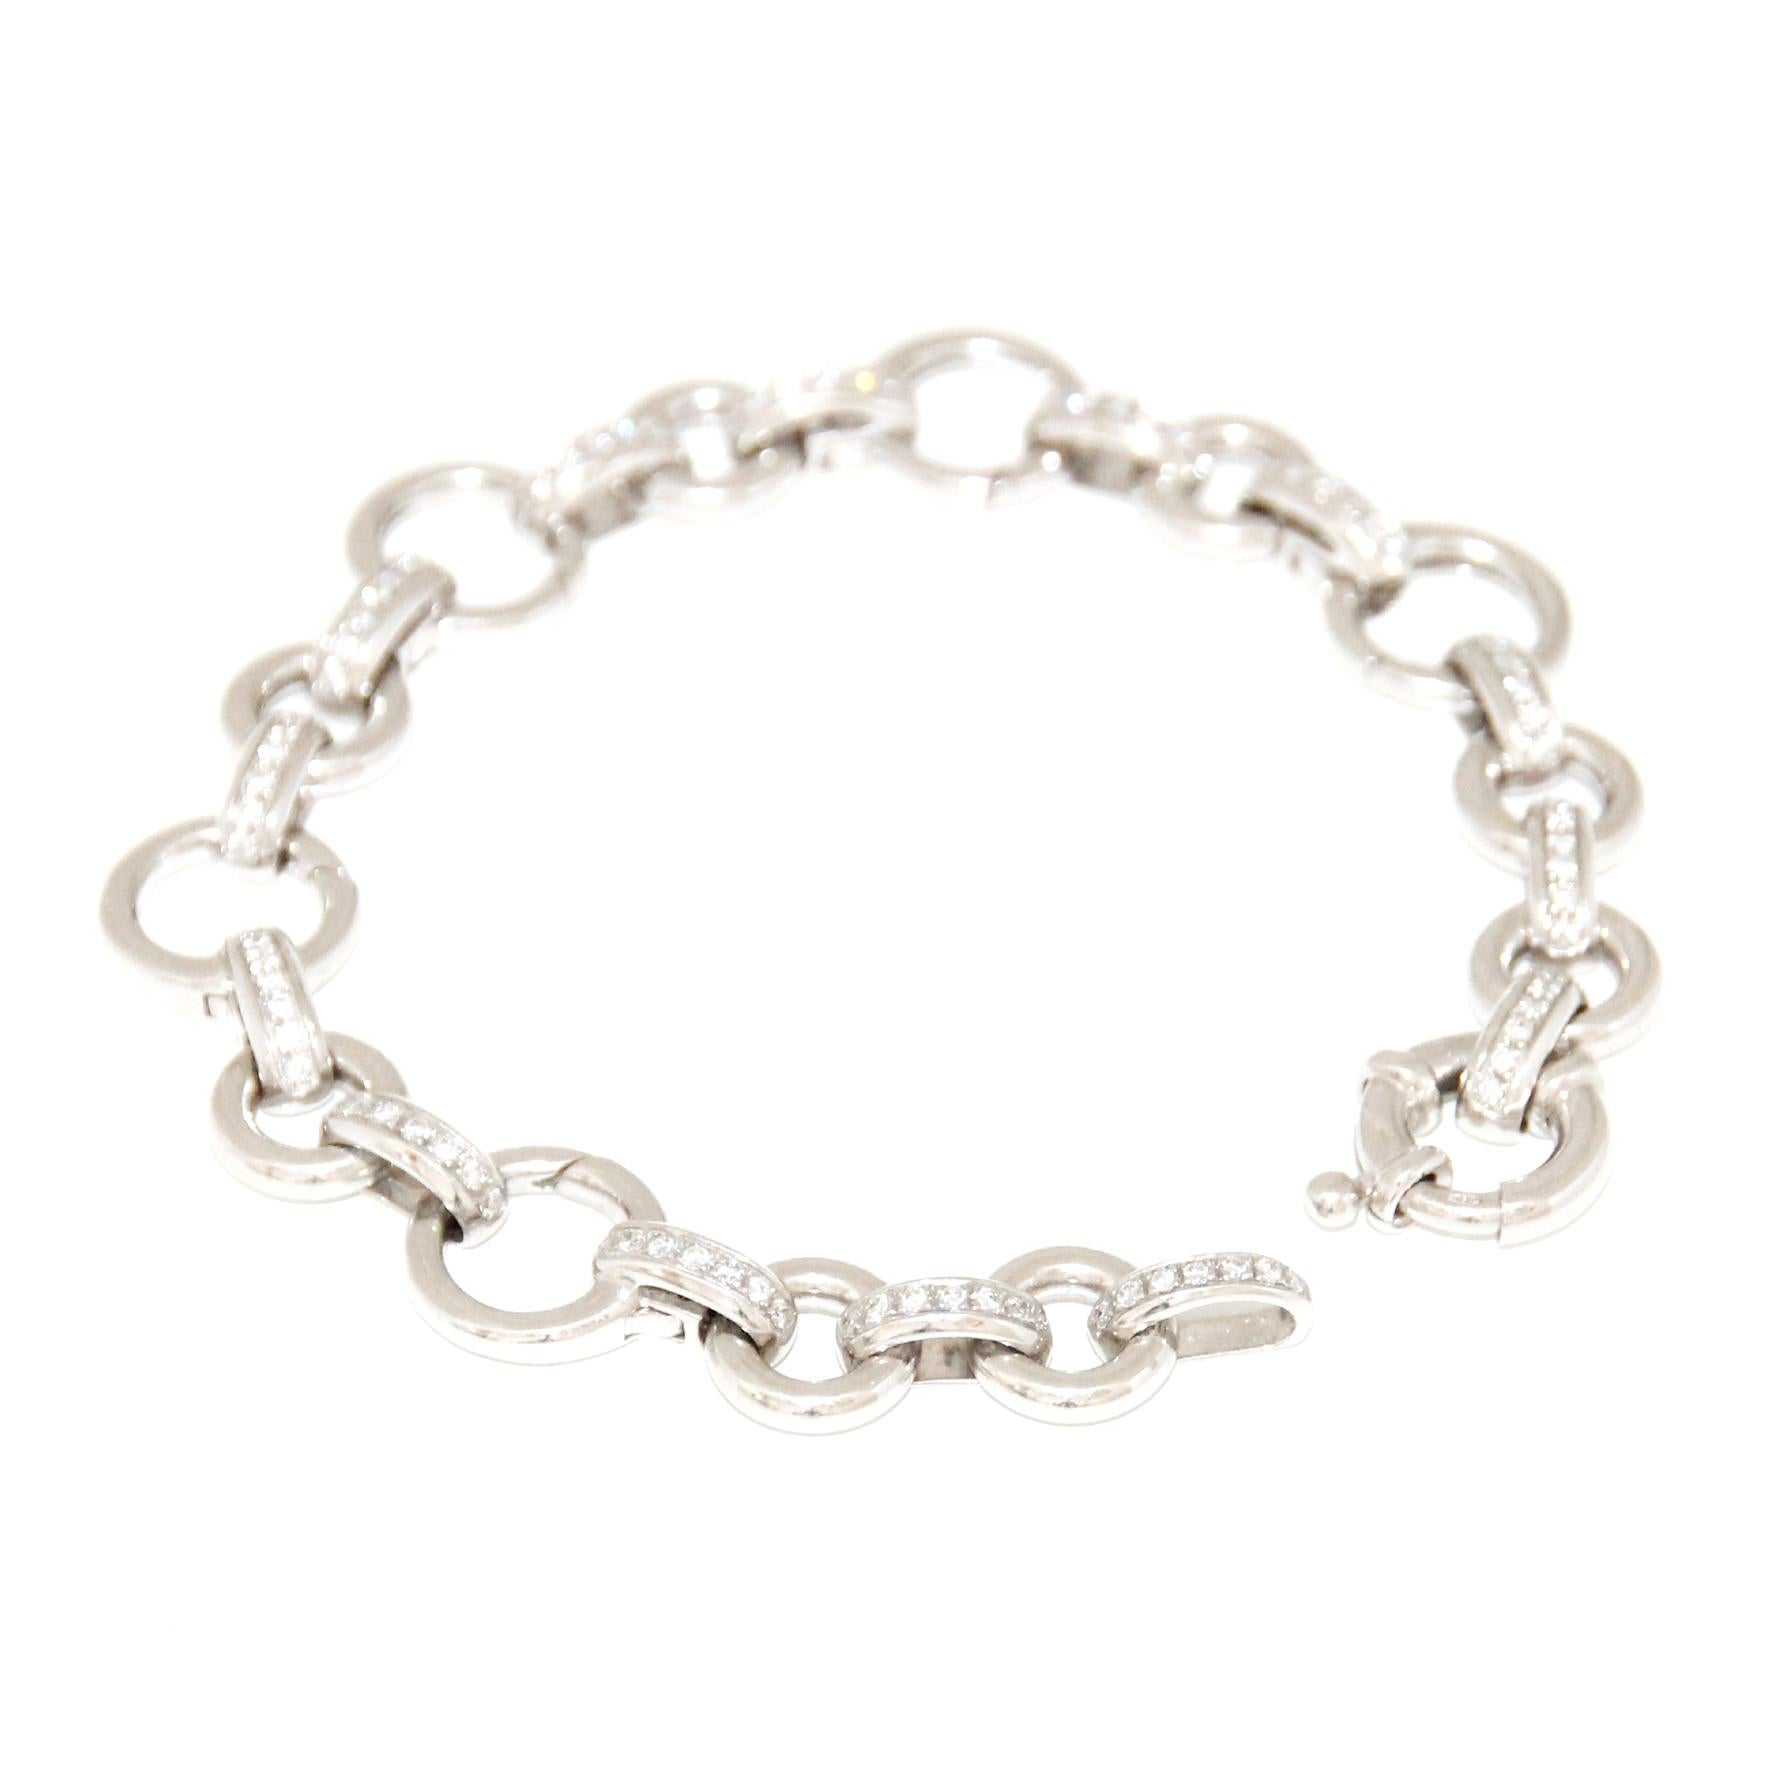 Aaron Basha 18k White Gold  and Diamonds  Link Bracelet 
Diamonds 0.95ctw   
The Links are  Removable
Multiple charms can be added 
Retail $9,800.00
( Please note  the charm is not included )